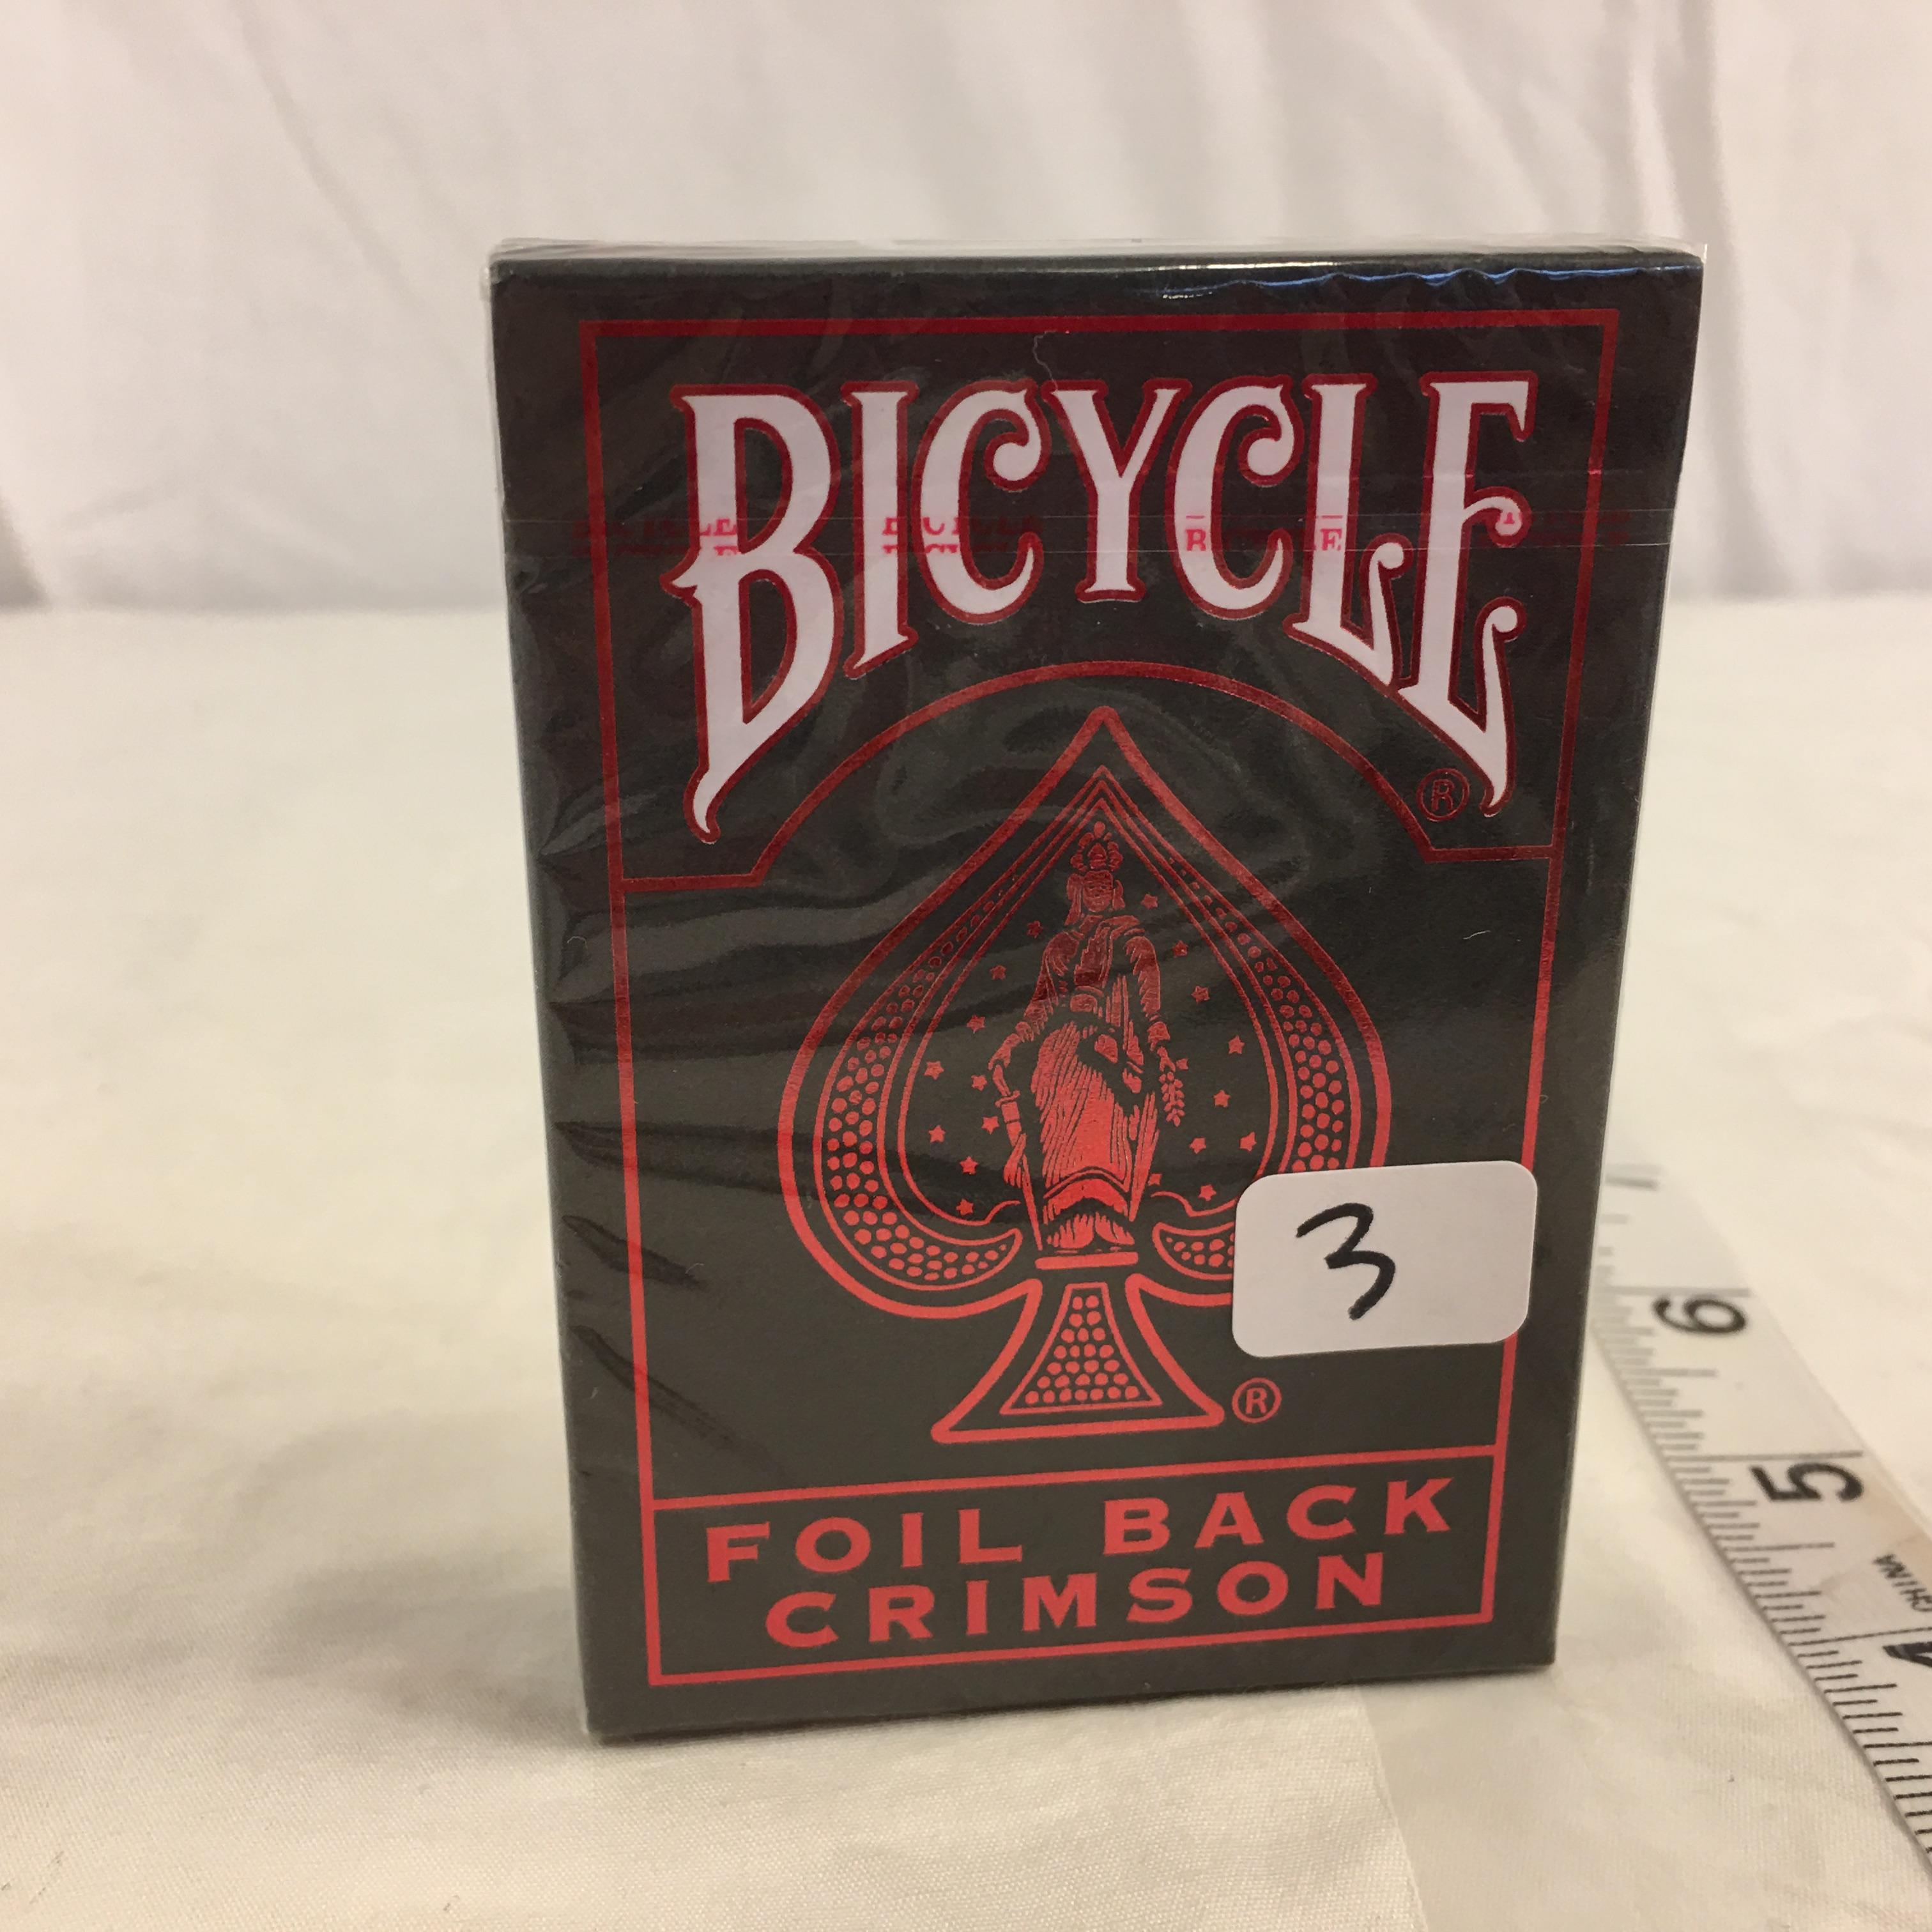 Collector New Sealed Bicycle Foil Black Crimson  Metalluxe Playing Card